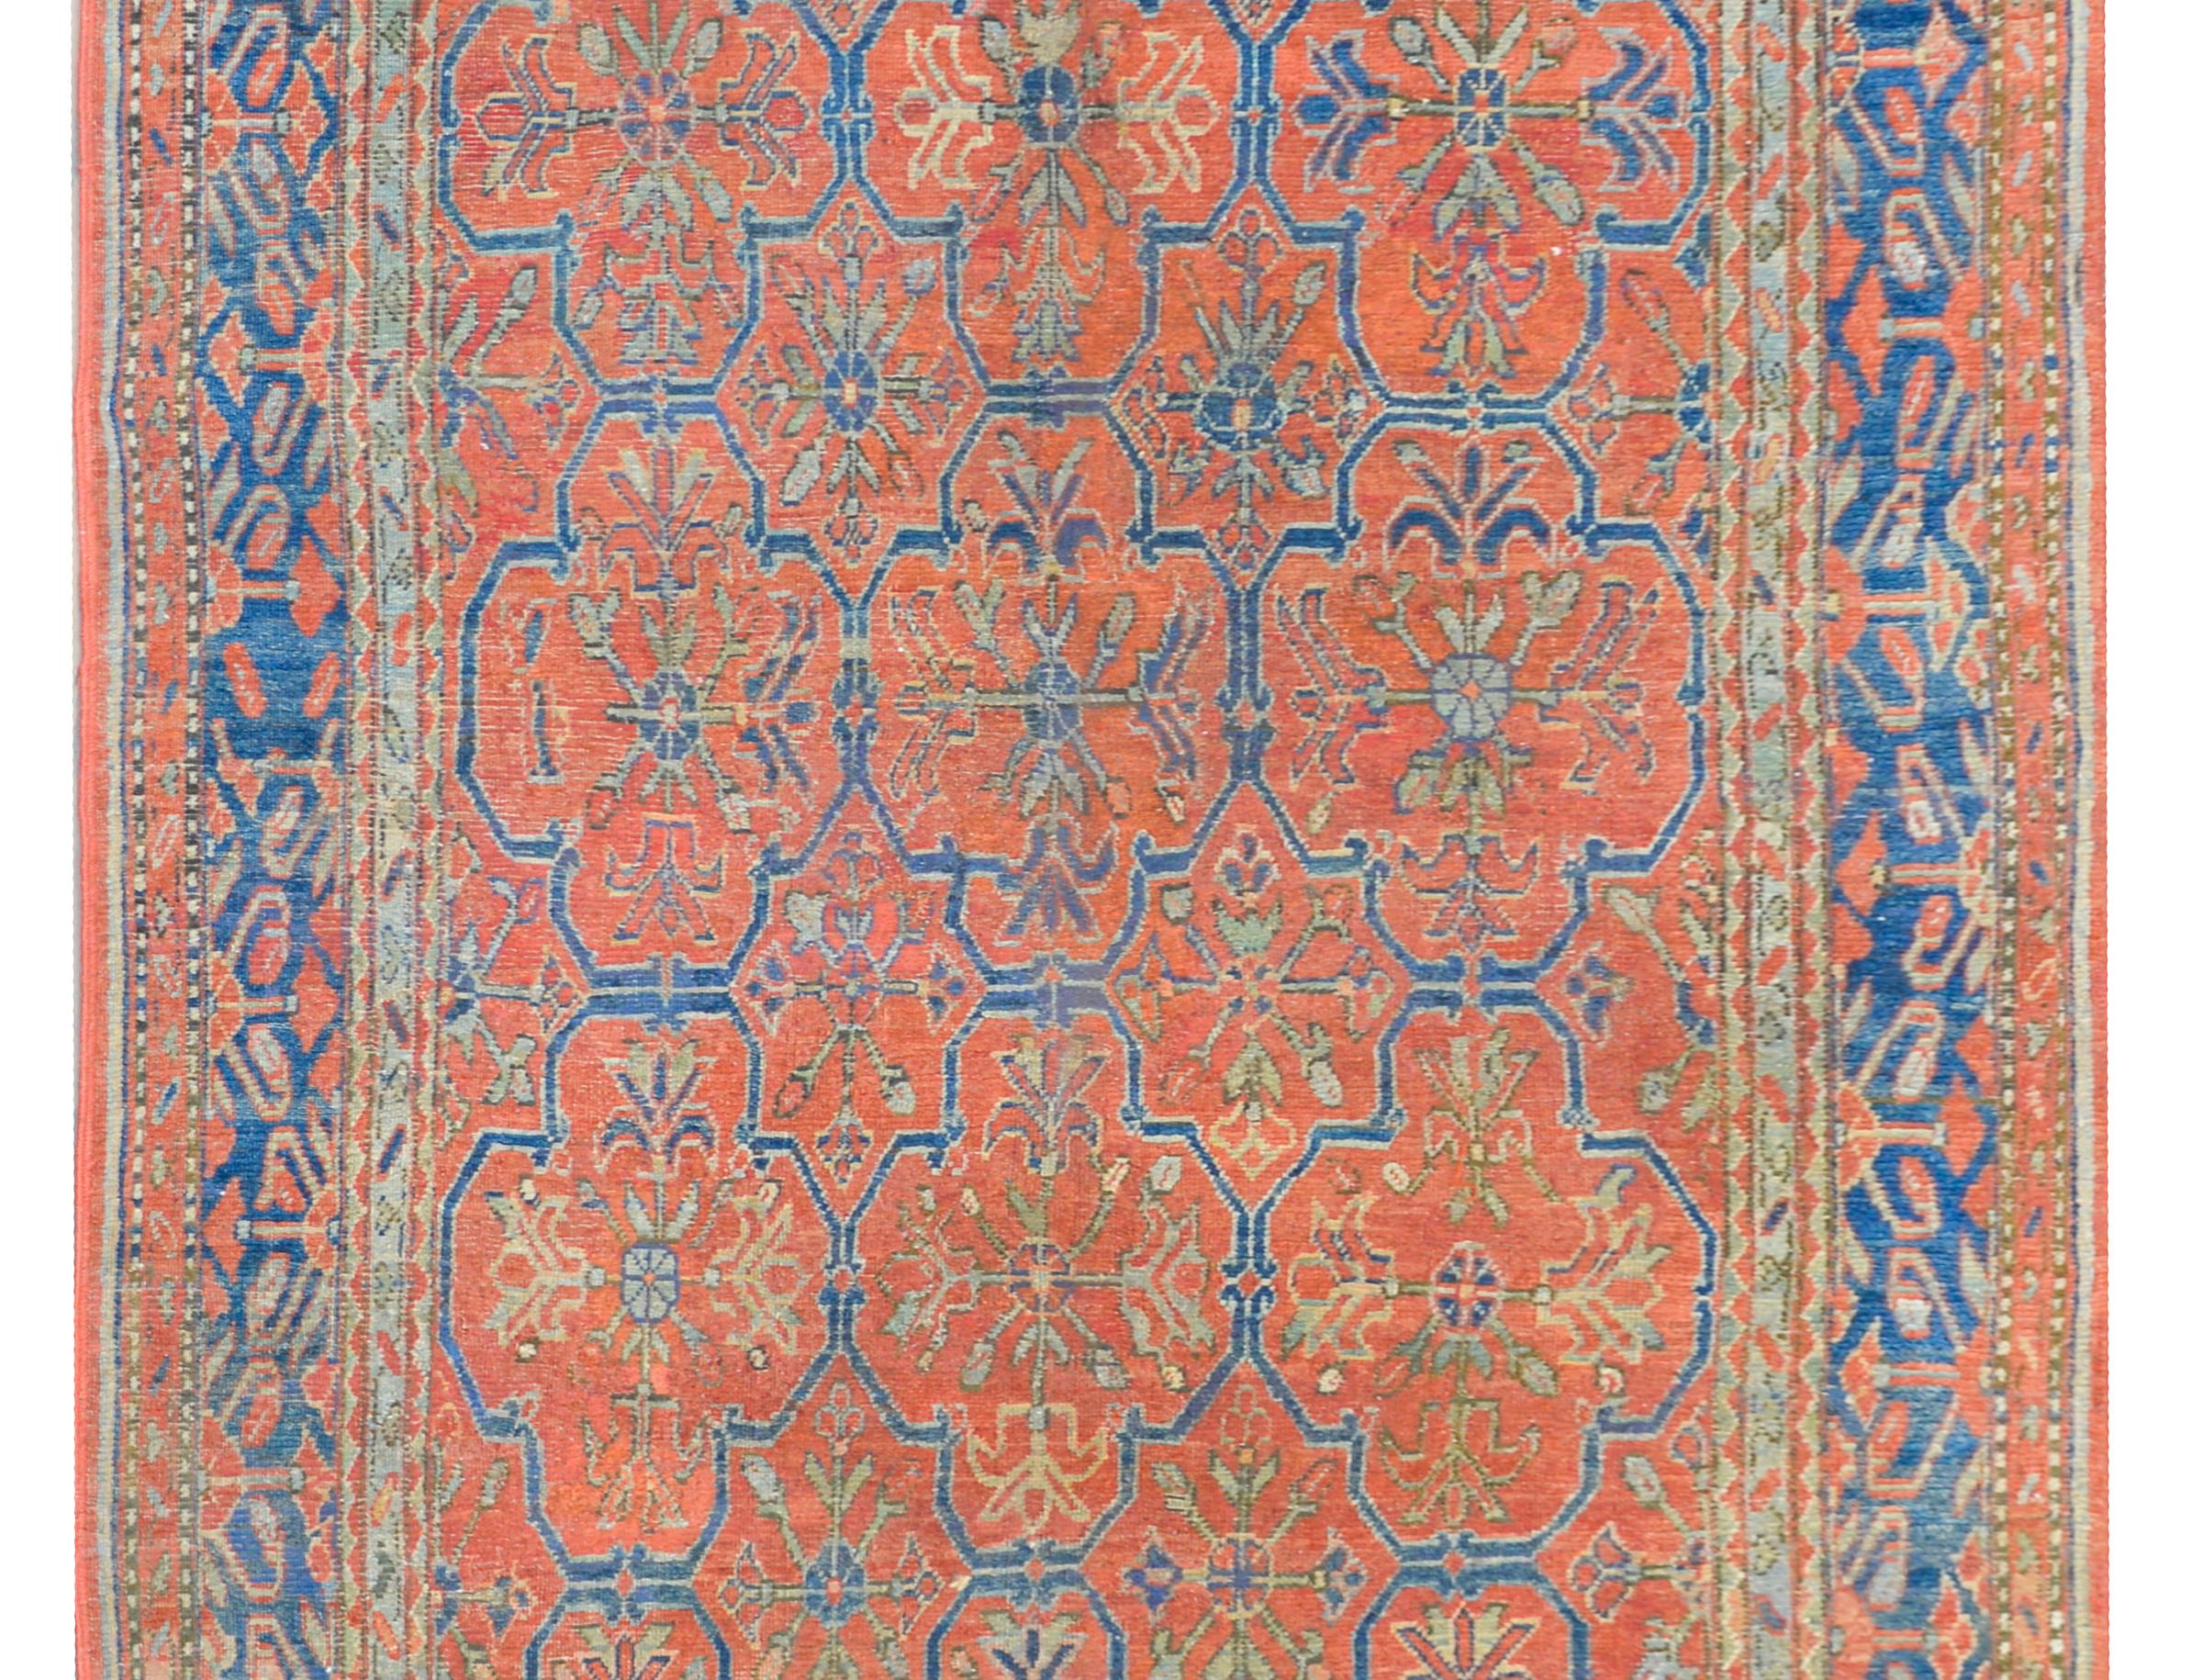 A rare and unusual 19th century Central Asian rug with a fantastic all-over trellis floral pattern woven in light and dark indigo, yellow, and green, against a crimson background, and surrounded by an amazing border composed with multiple petite and